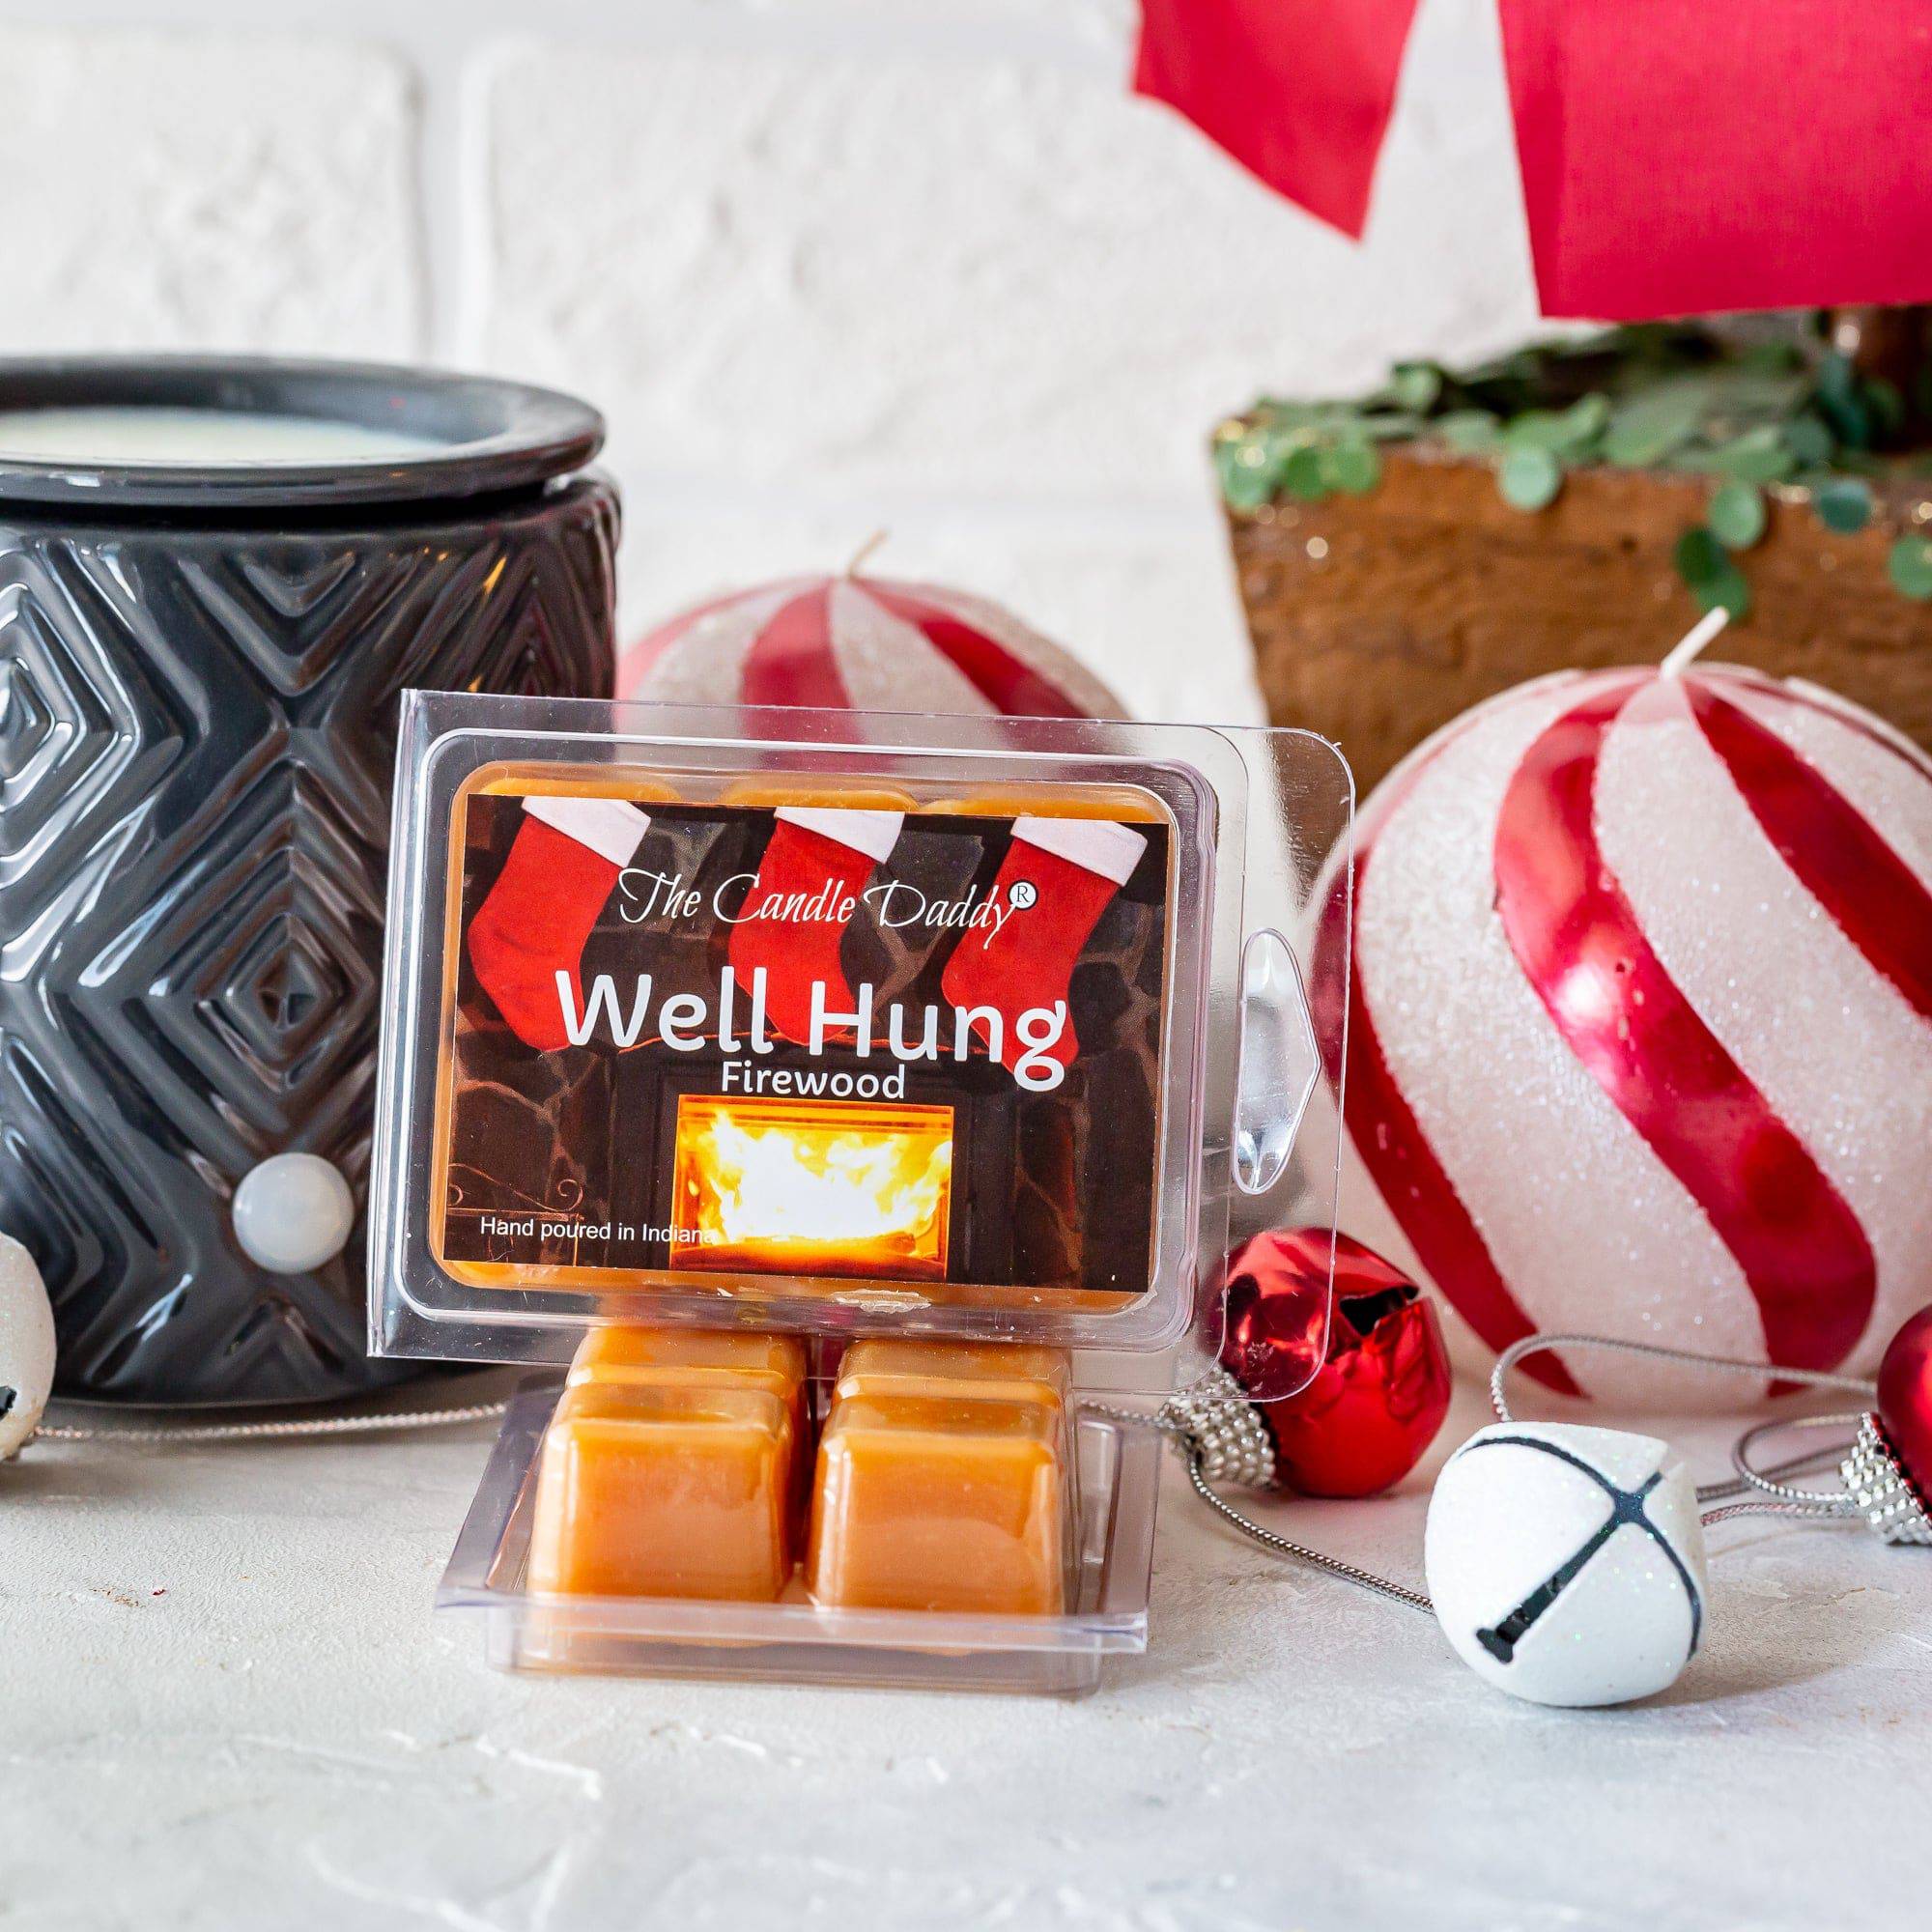 Well Hung - Fireplace Scented Wax Melt Cubes - 1 Pack - 2 Ounces